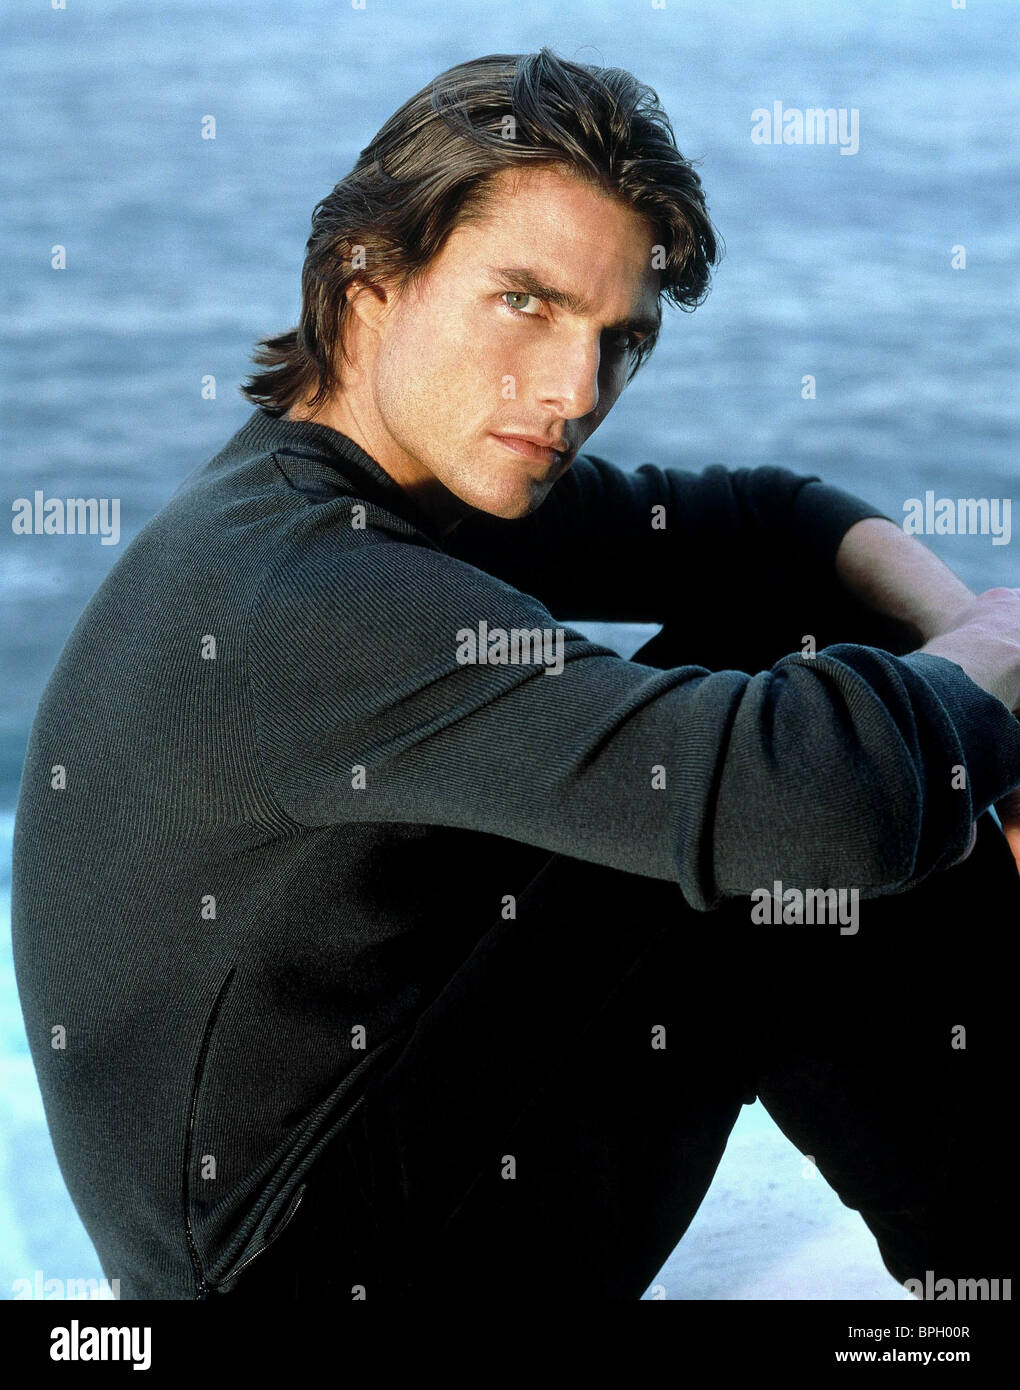 tom-cruise-mission-impossible-ii-mission-impossible-2-2000-BPH00R.jpg